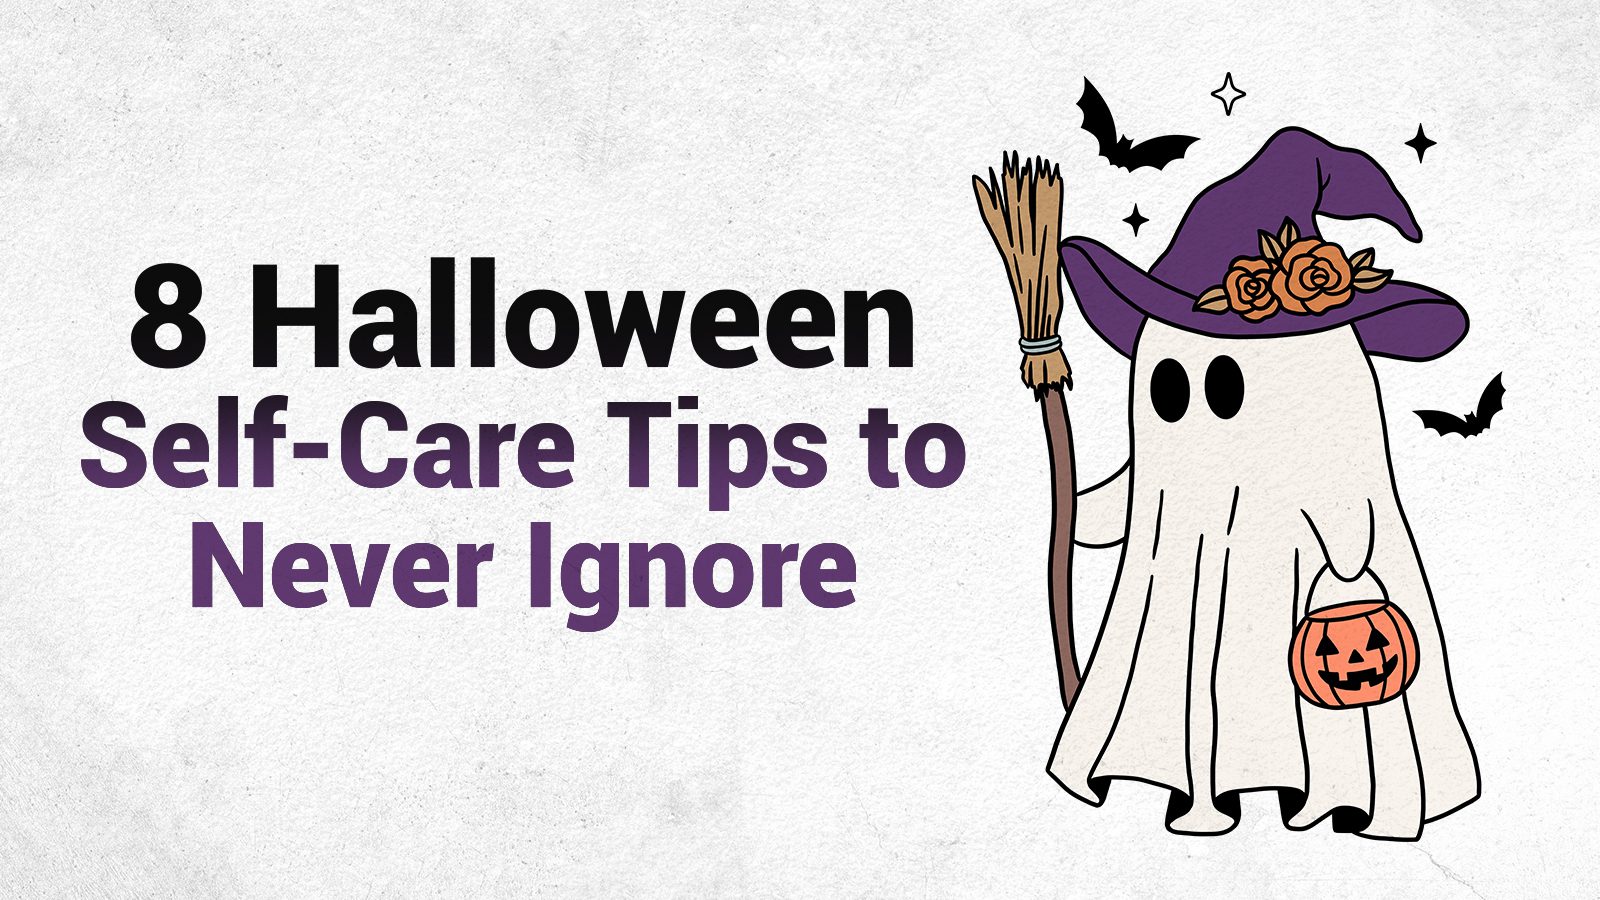 8 Halloween Self-Care Tips to Never Ignore